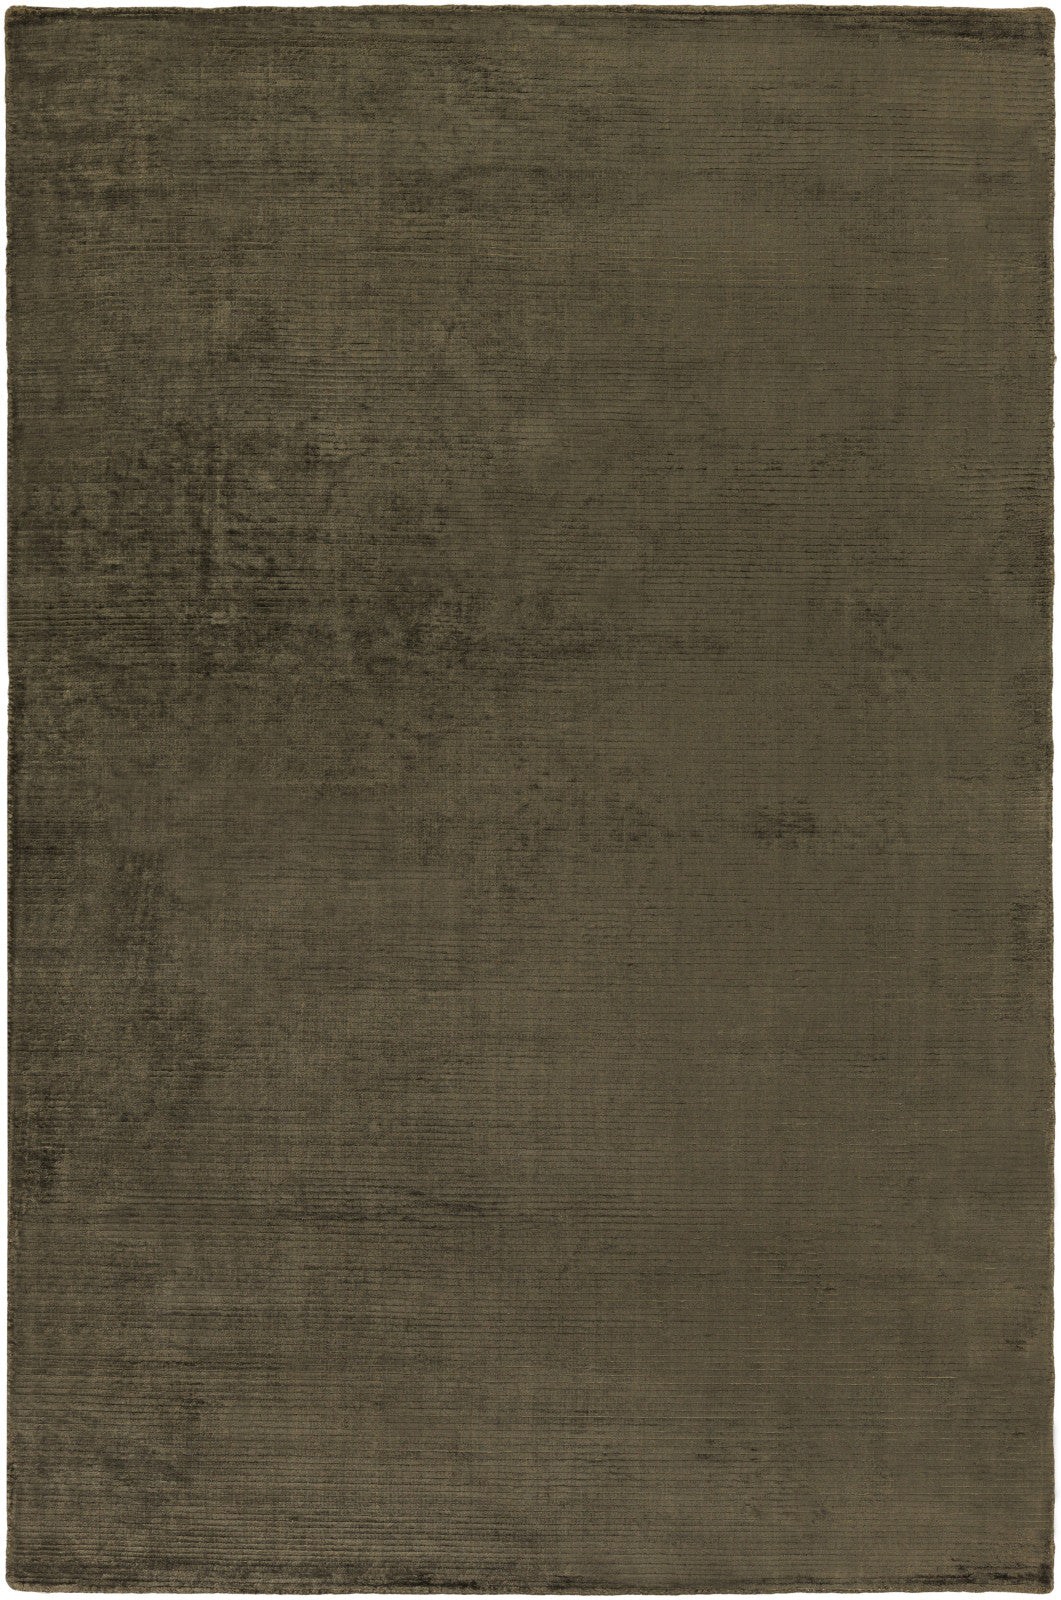 Artistic Weavers Charlotte Beverly Olive Green Area Rug main image